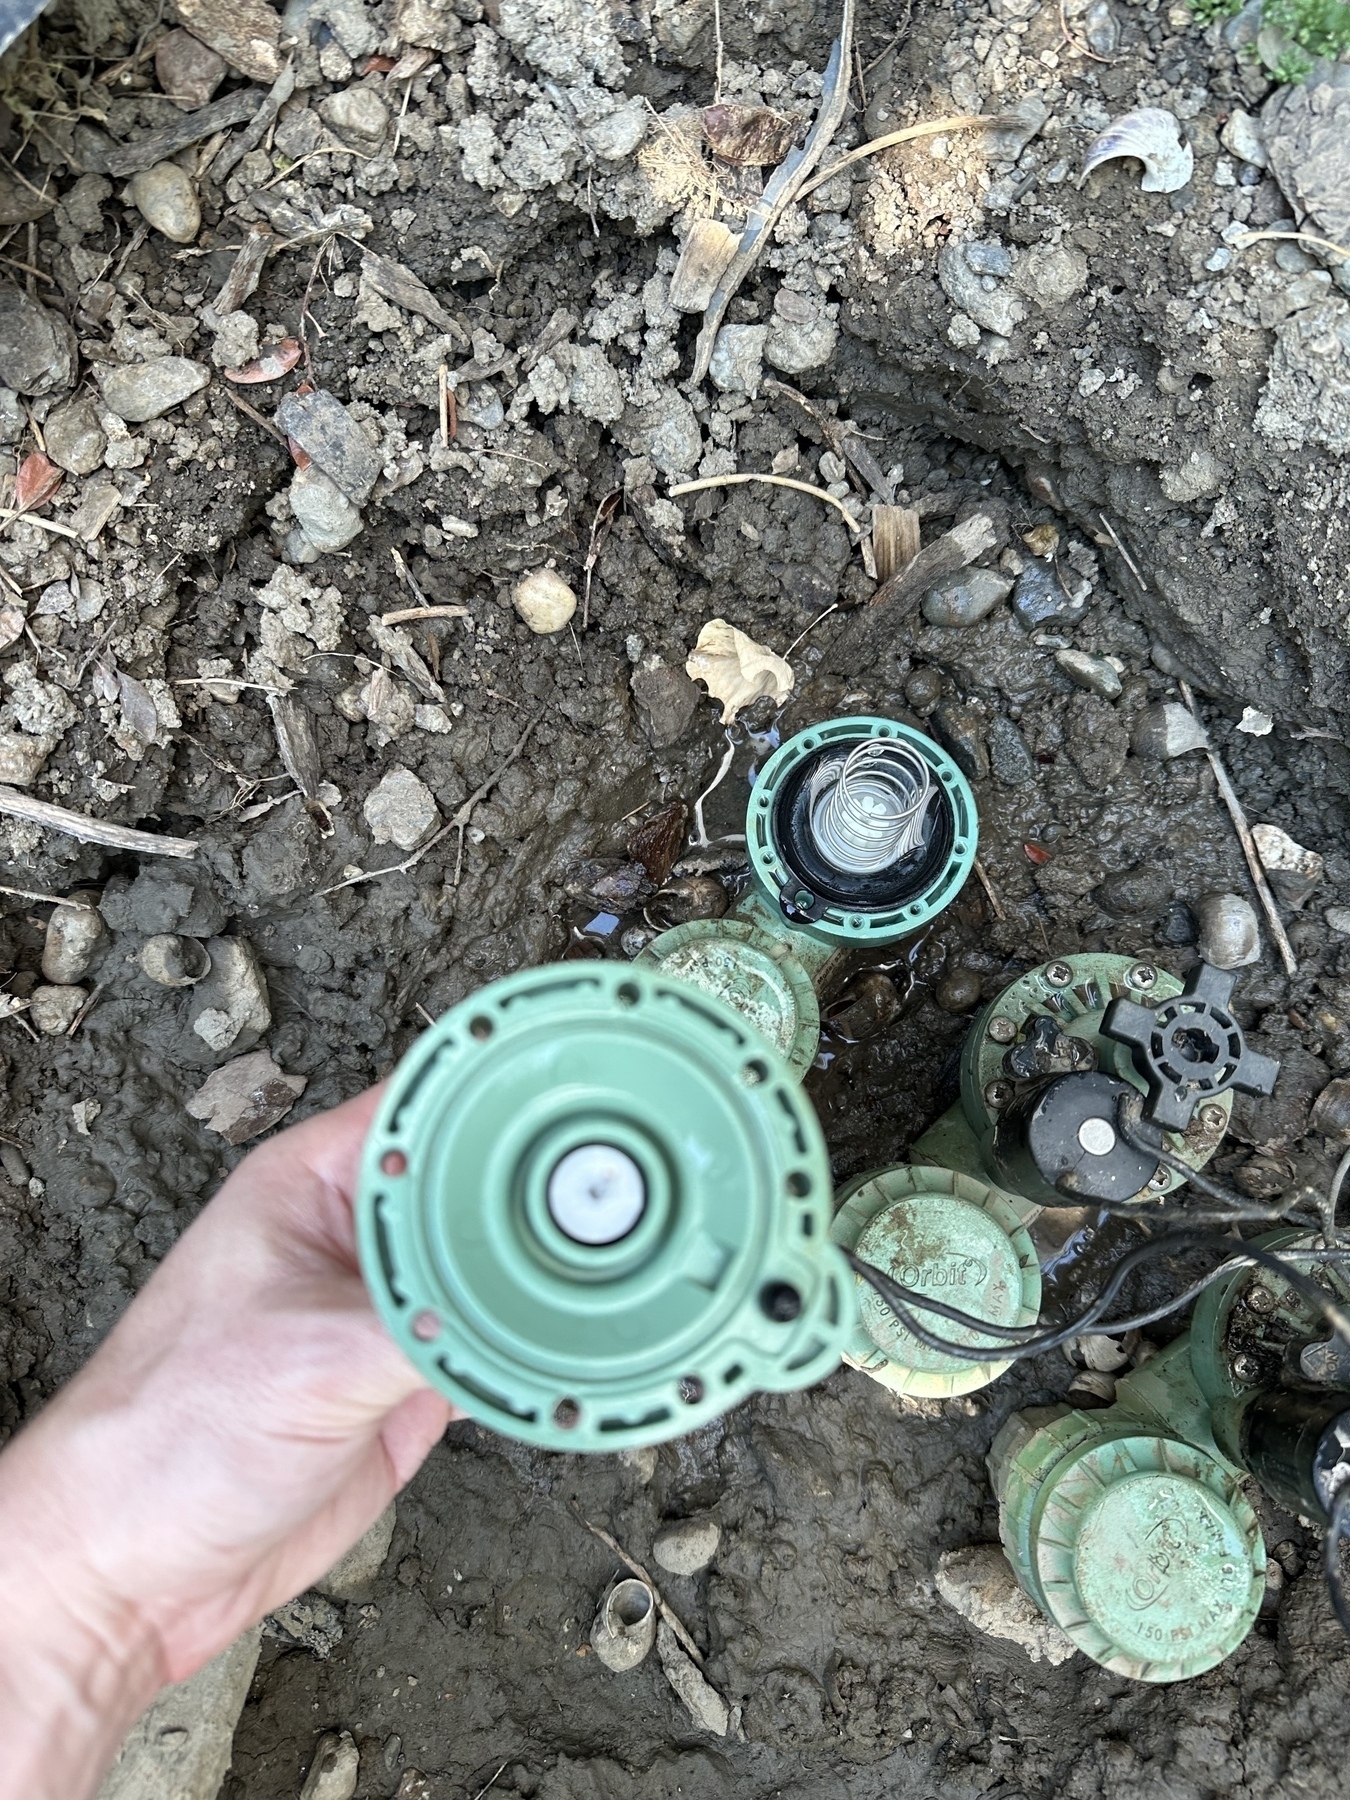 A green auto-siphon auto-sprinkler diaphragm cap is removed, held in my hand, its underside facing up at the viewer. The old diaphragm and spring can be seen where the cap was installed.